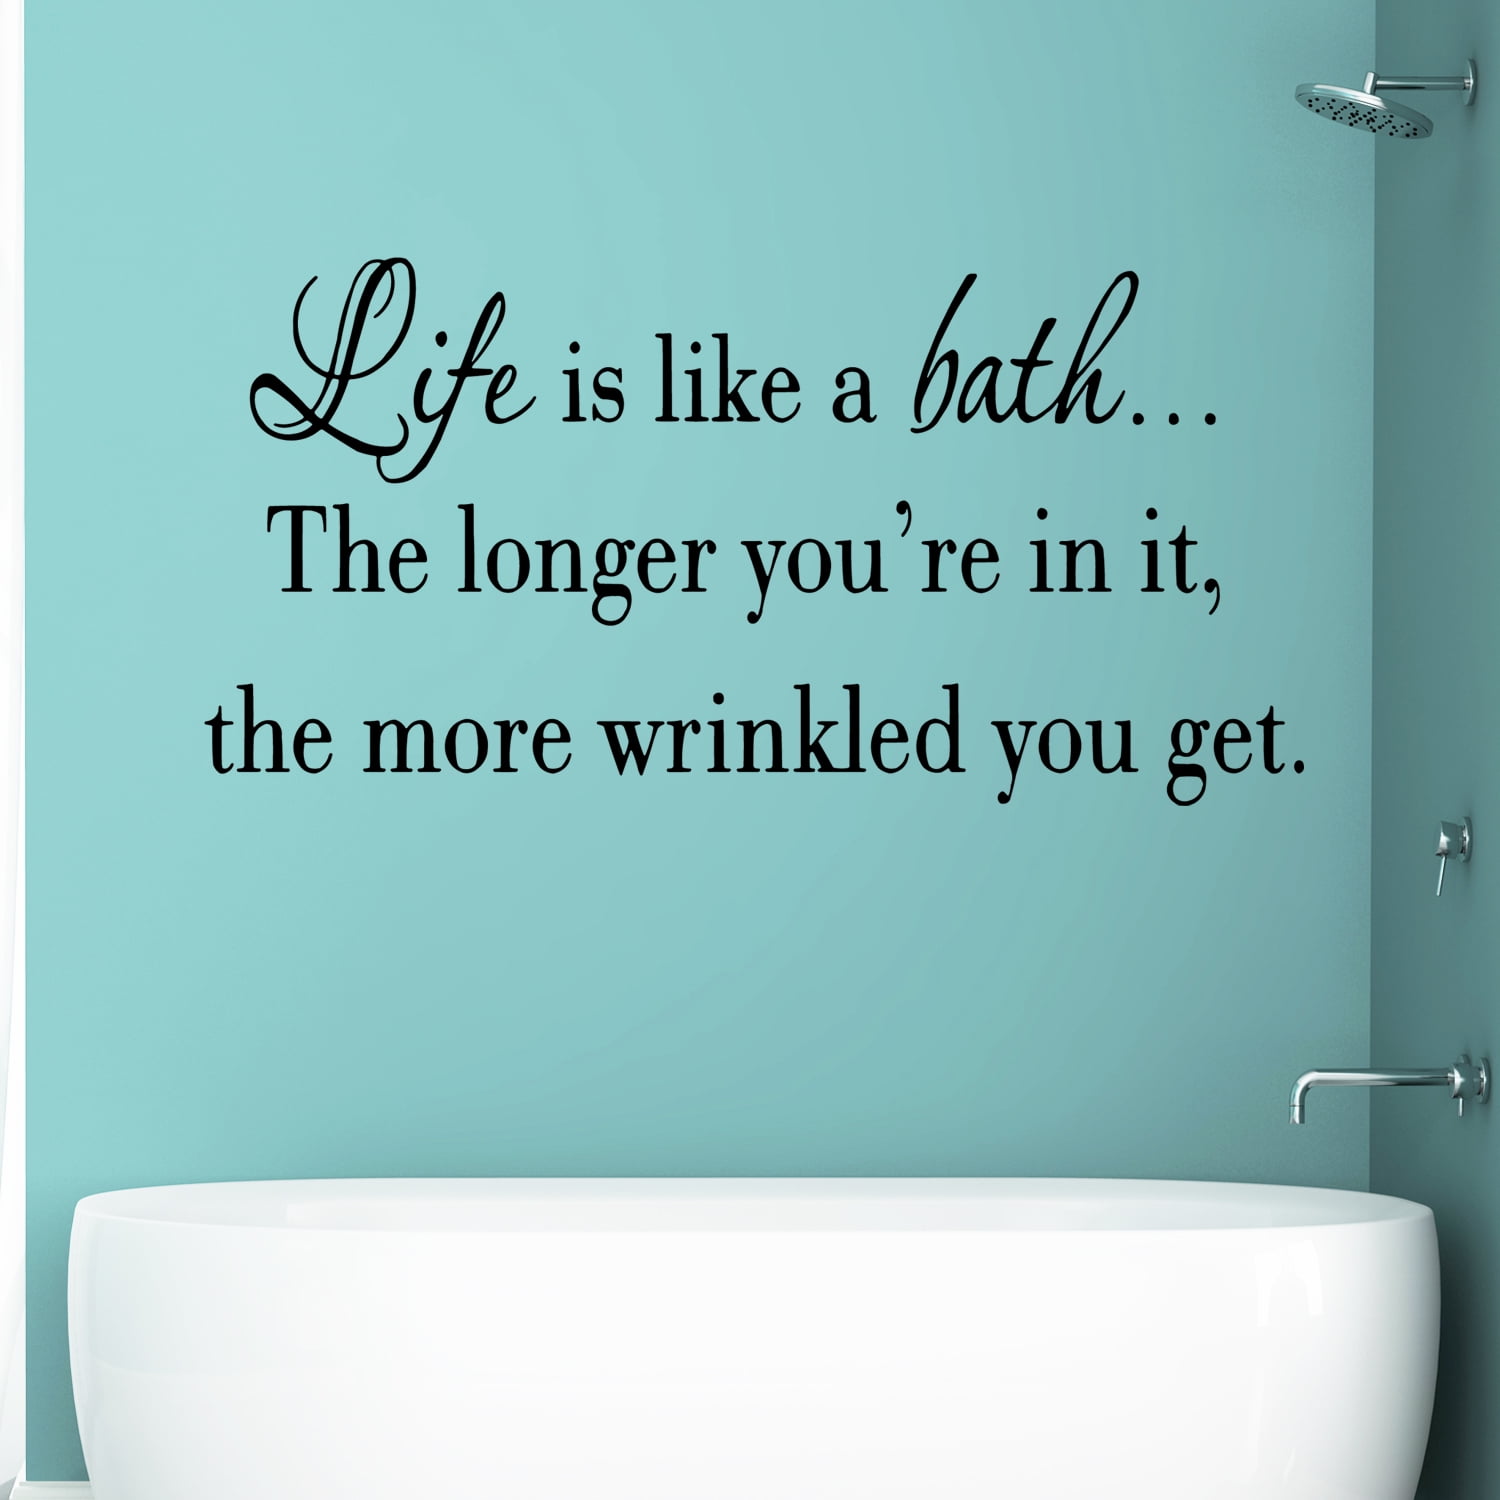 5" x 23" Fun Quote Sticker for Home Bathroom Rules Vinyl Wall Art Decal